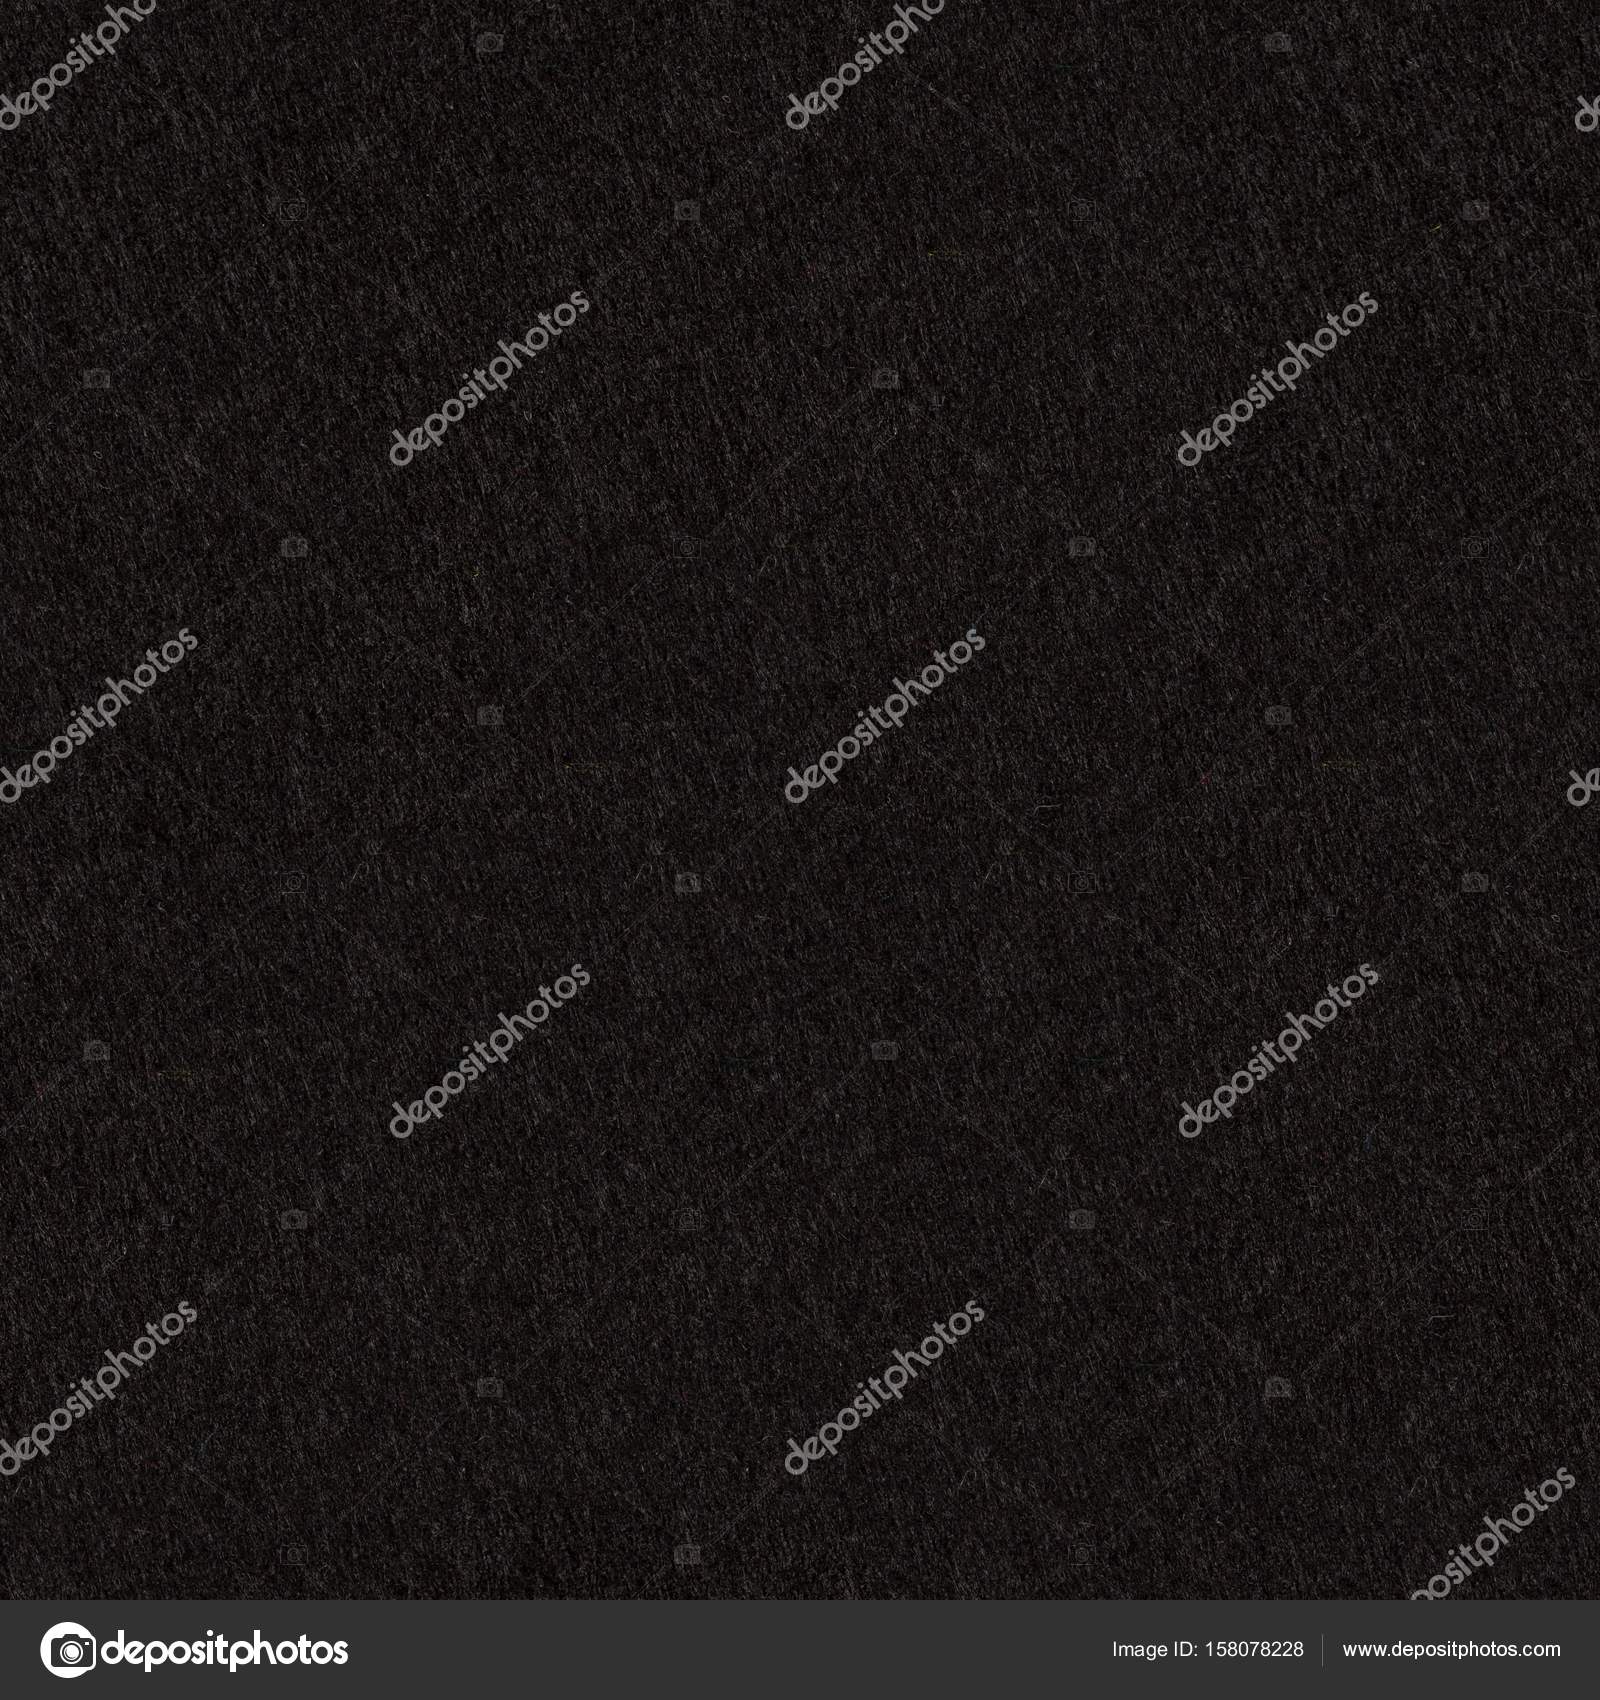 Black felt fabric texture can be use as background Stock Photo by